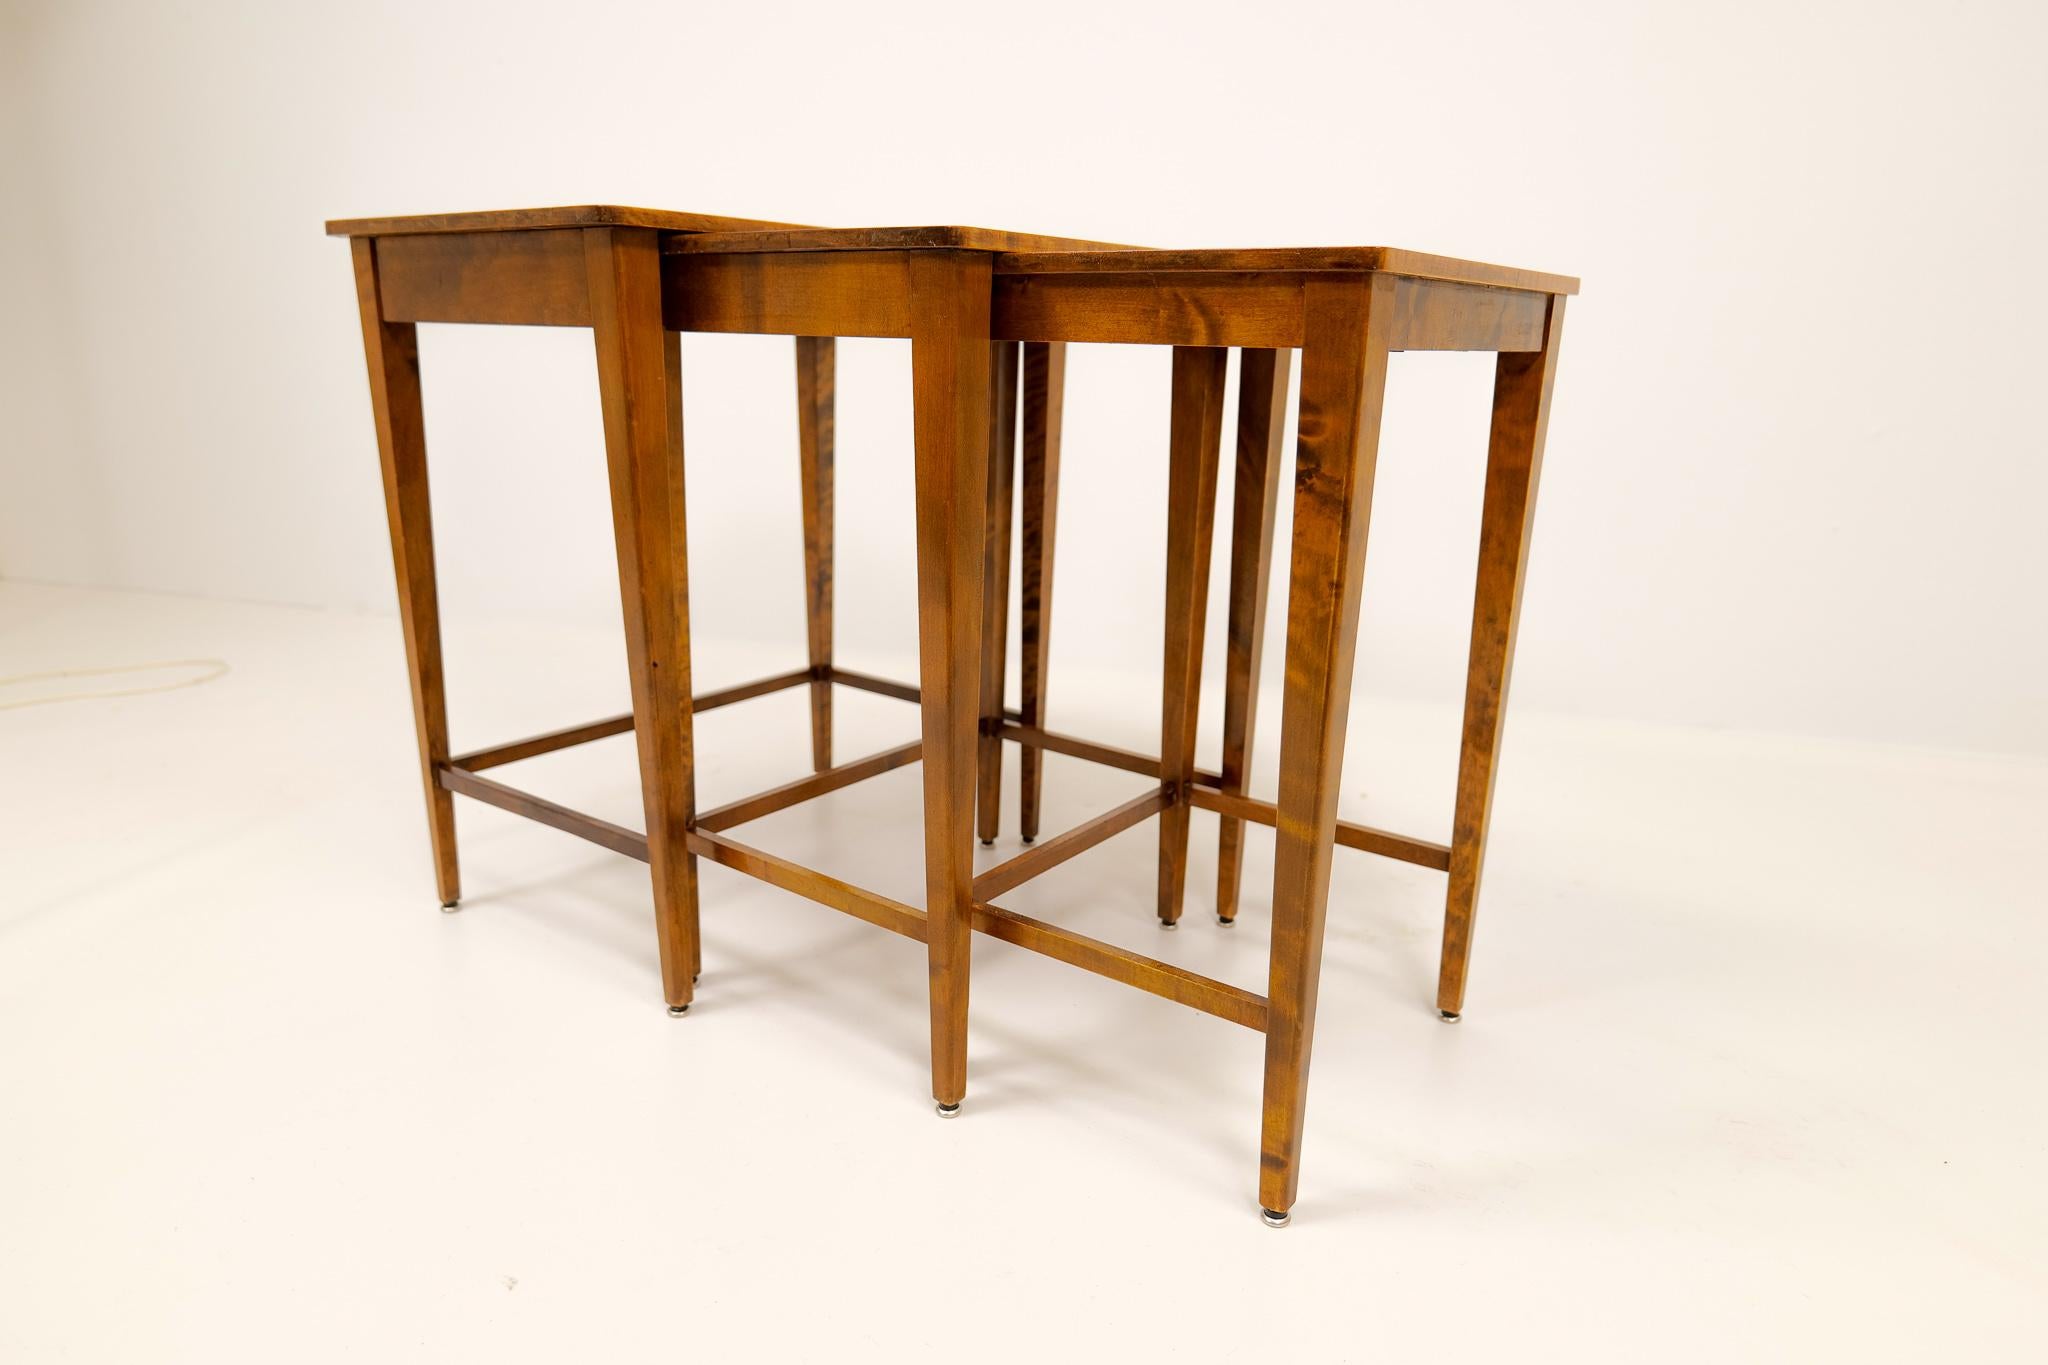 Art Deco Nesting Tables Mahogany and Stained Birch, NK Sweden, 1940s For Sale 2